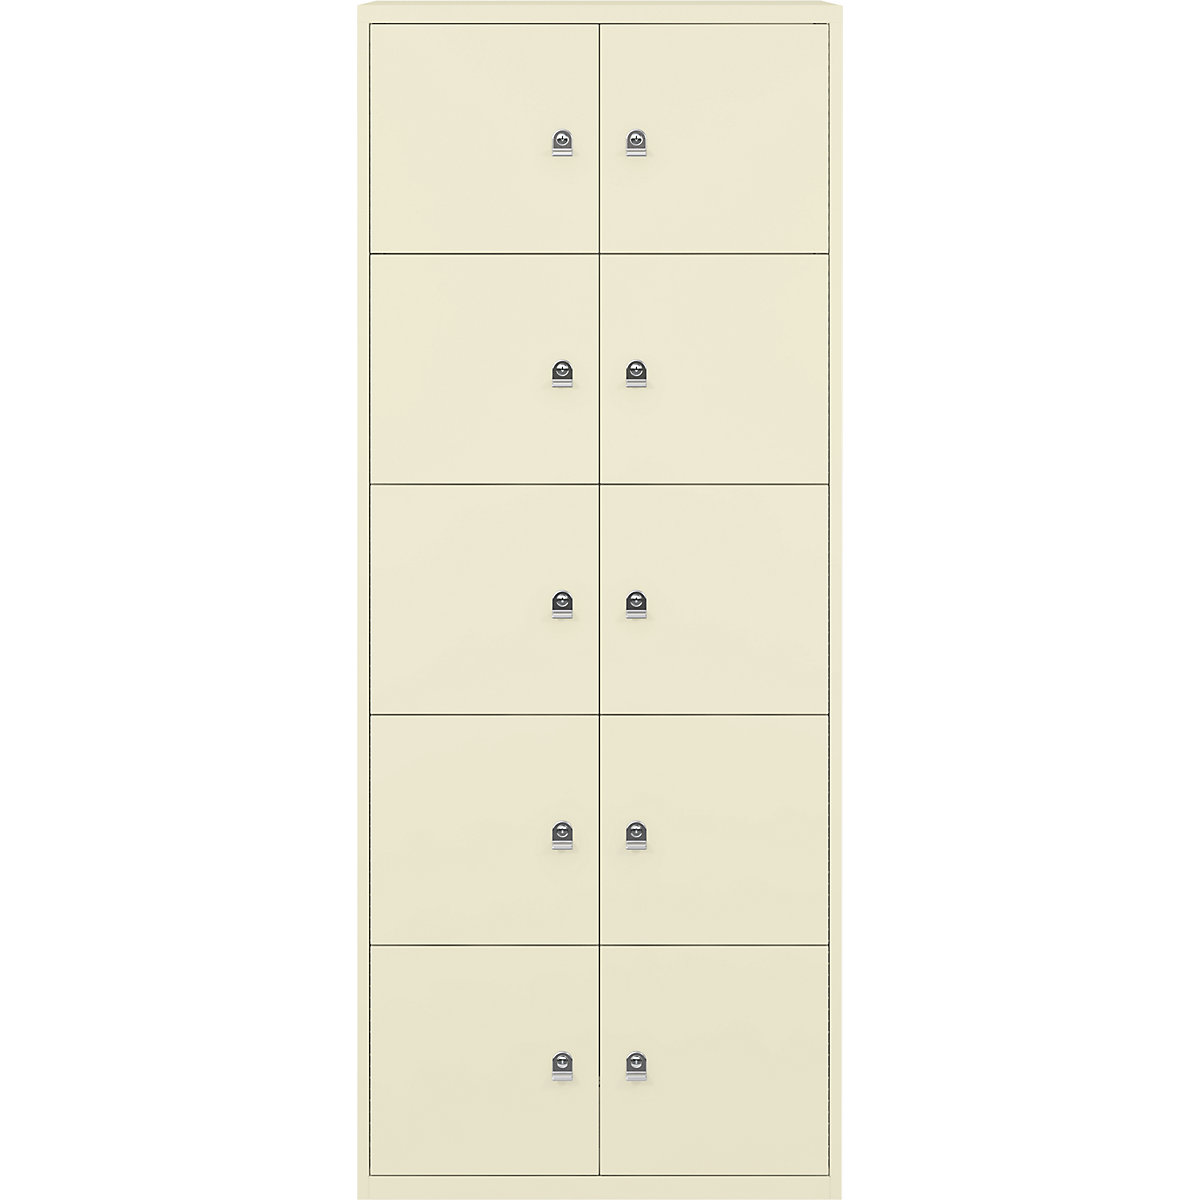 LateralFile™ lodge – BISLEY, with 10 lockable compartments, height 375 mm each, light ivory